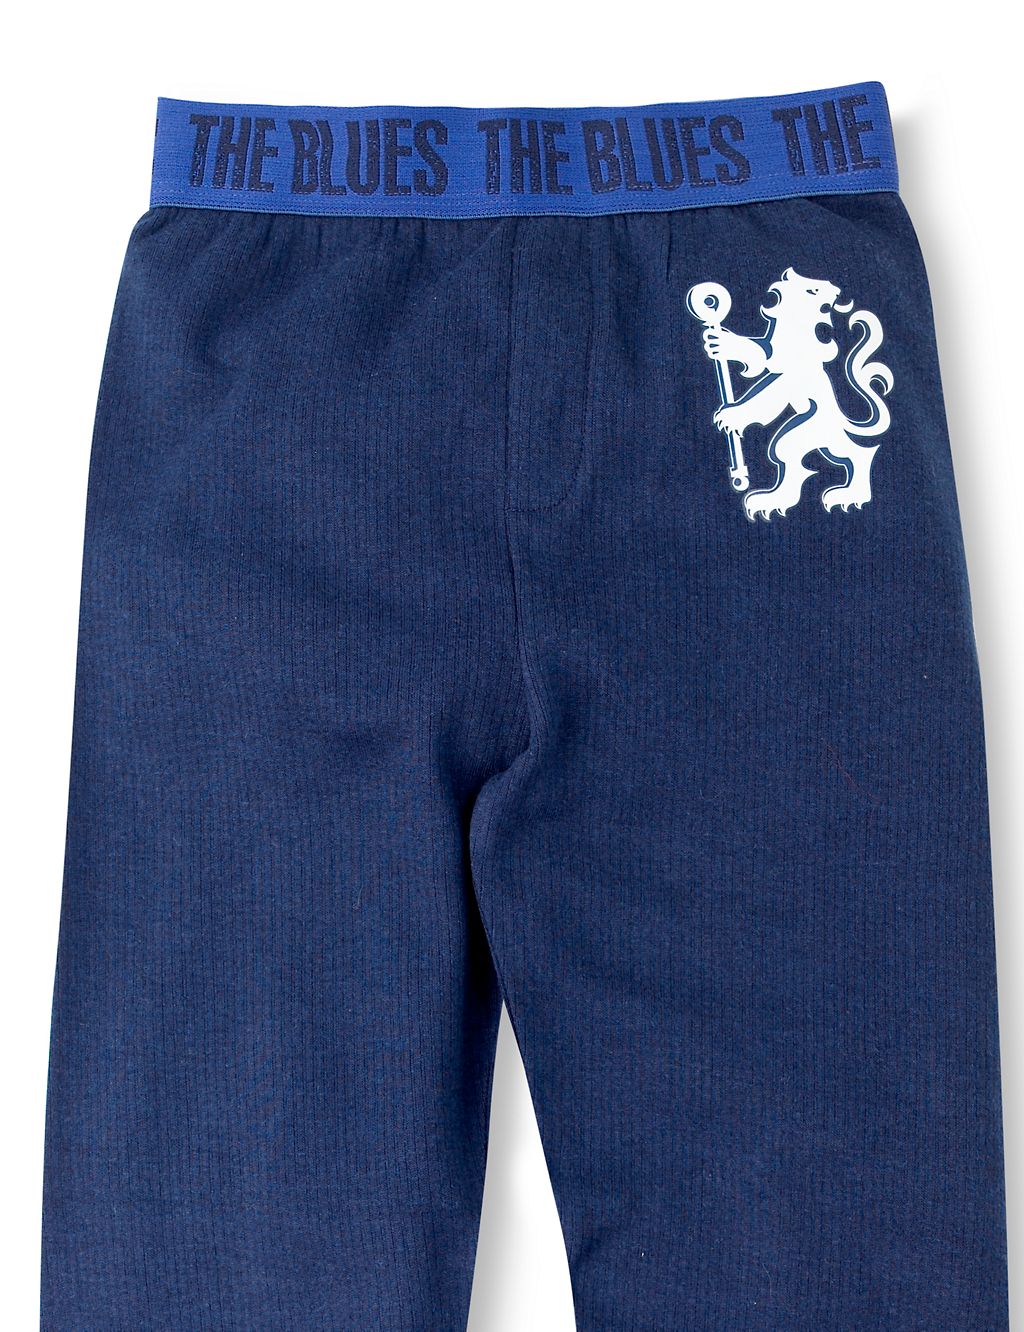 Chelsea Football Club Thermal Top & Trousers Set 2 of 3